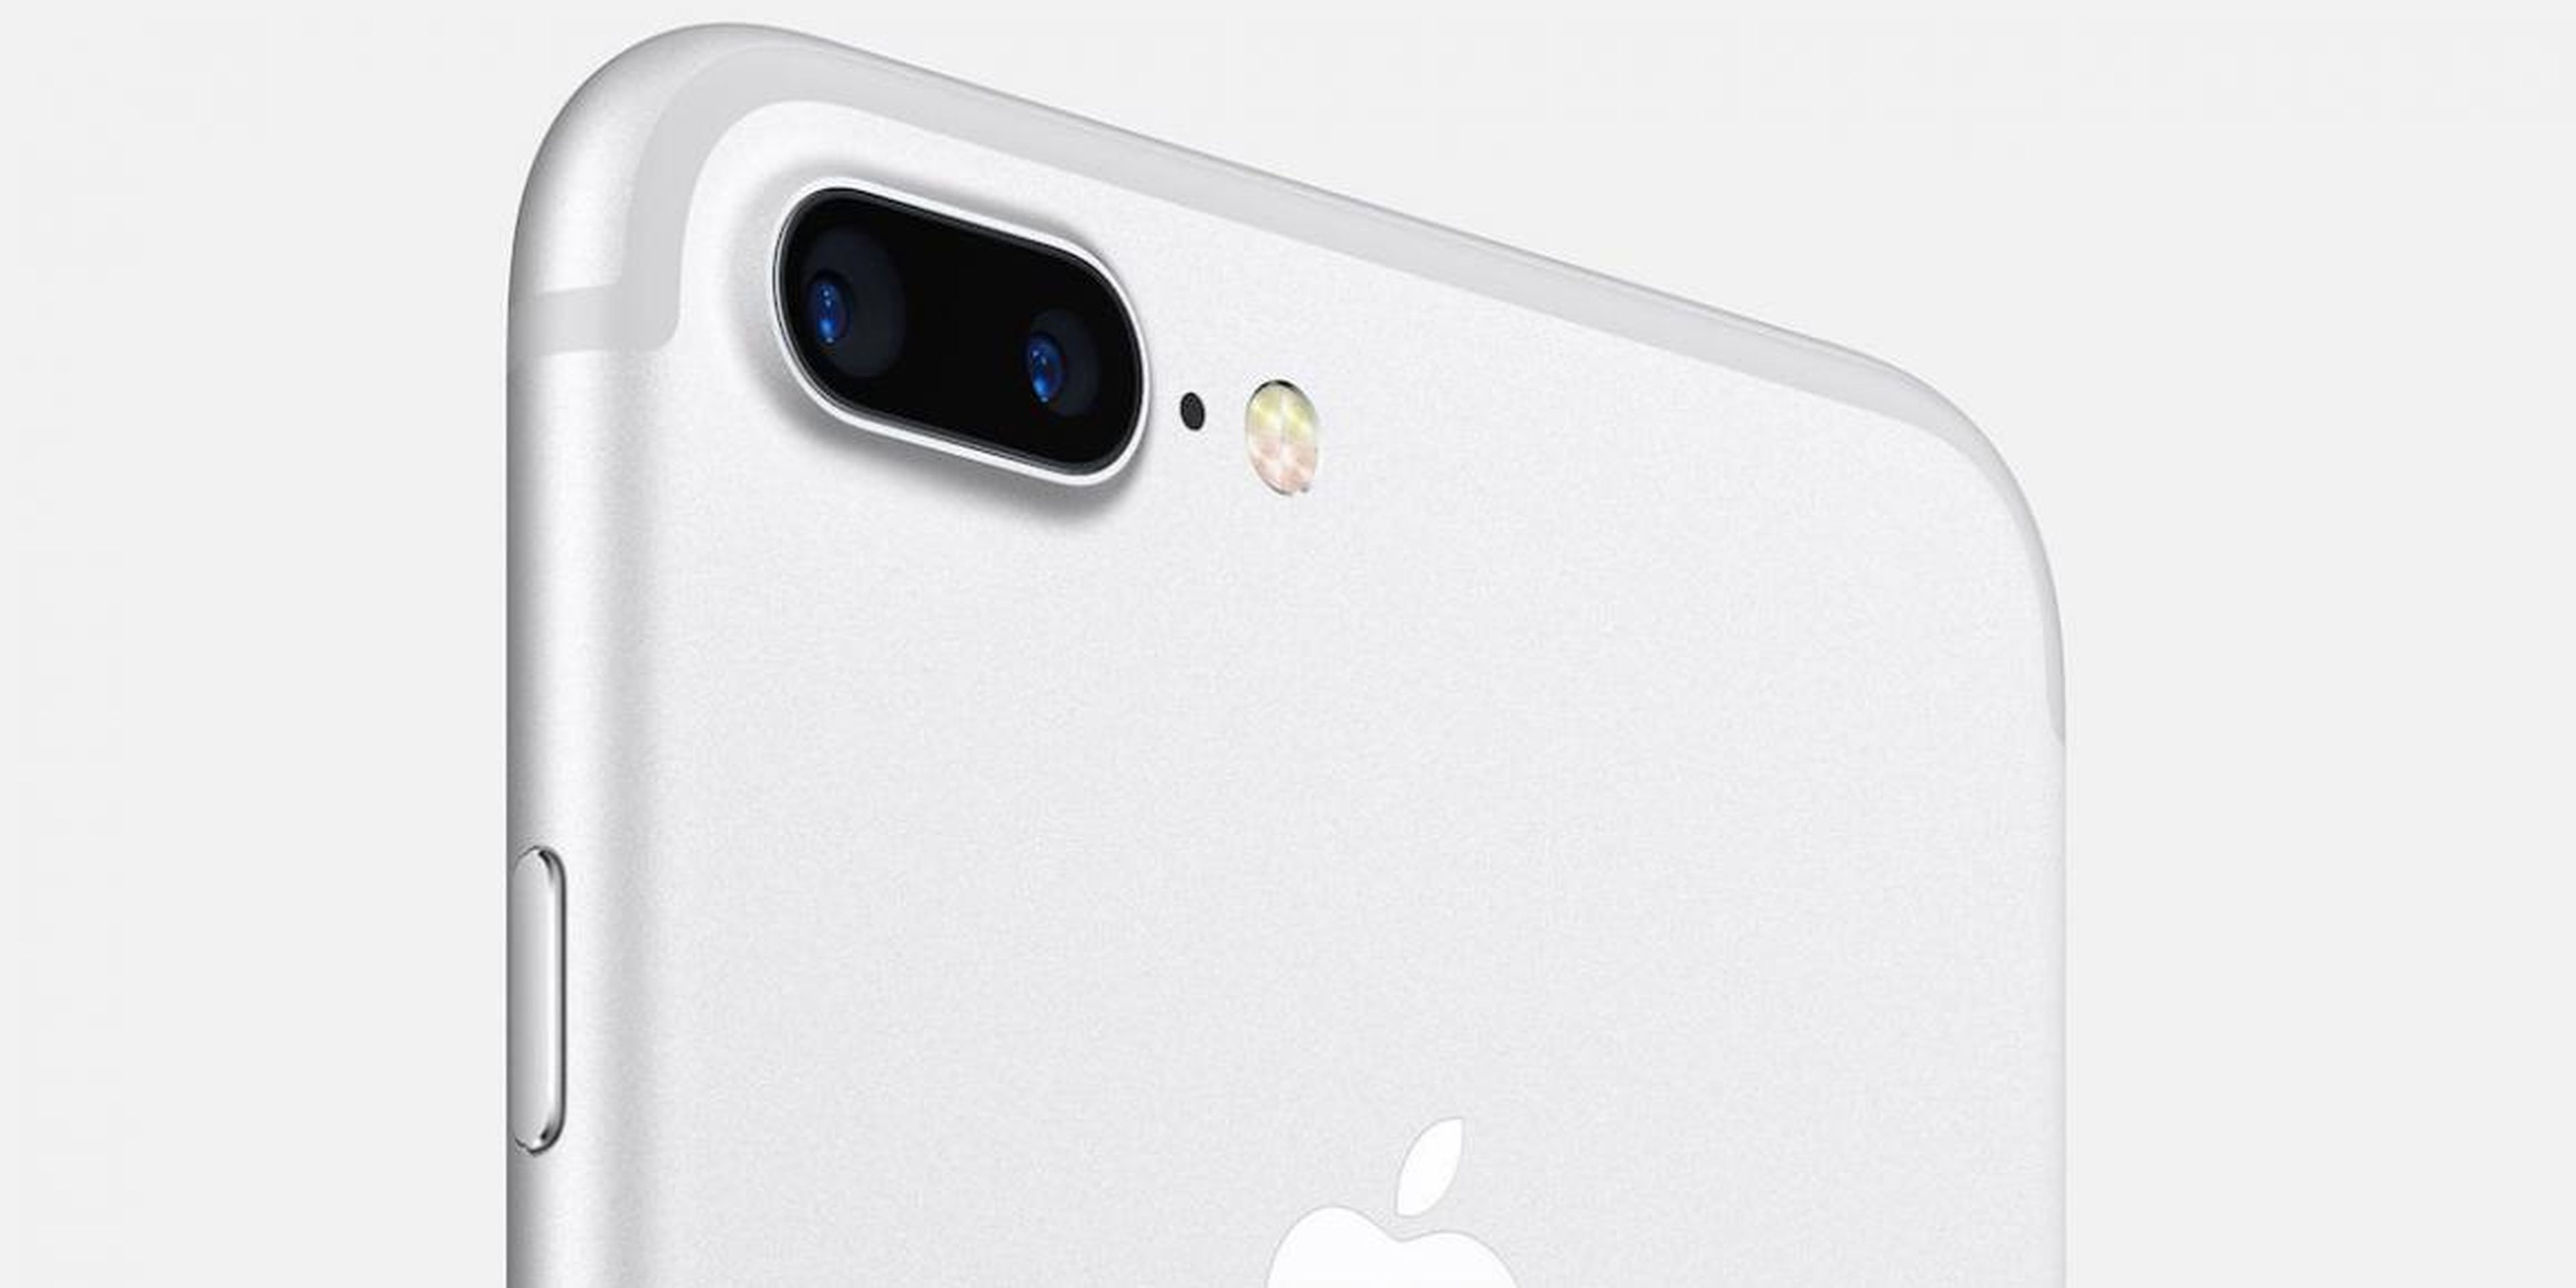 8 reasons why you should get the iPhone 7 instead of the new iPhone XR, XS, or XS Max